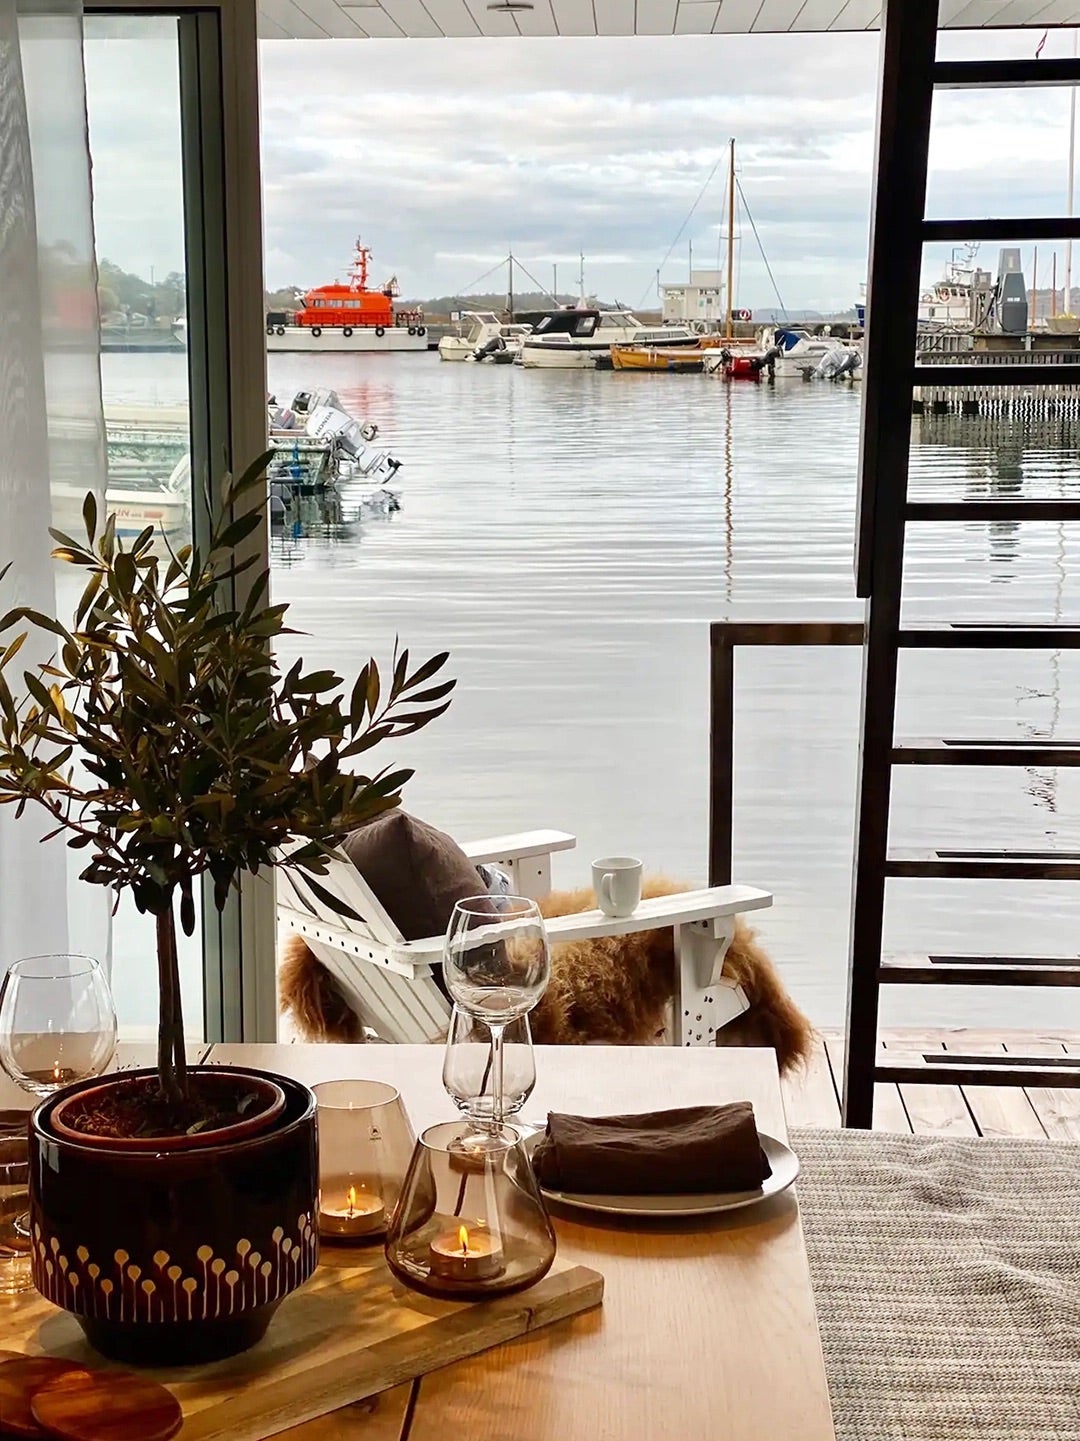 view from dining table on houseboat